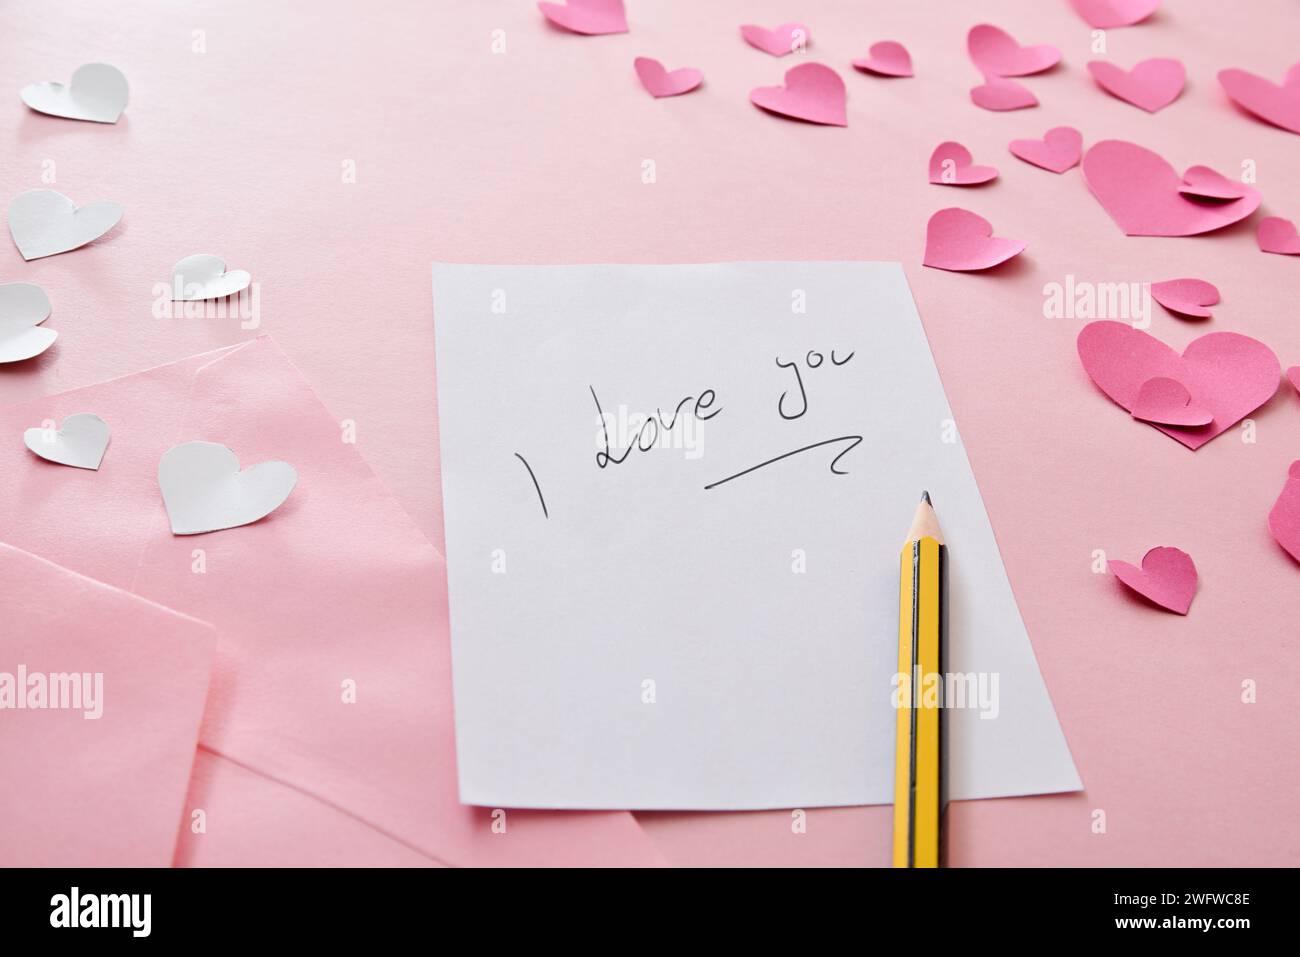 Note with writing I love you on white paper on a pink background full of heart-shaped cutouts. Top elevated view. Stock Photo